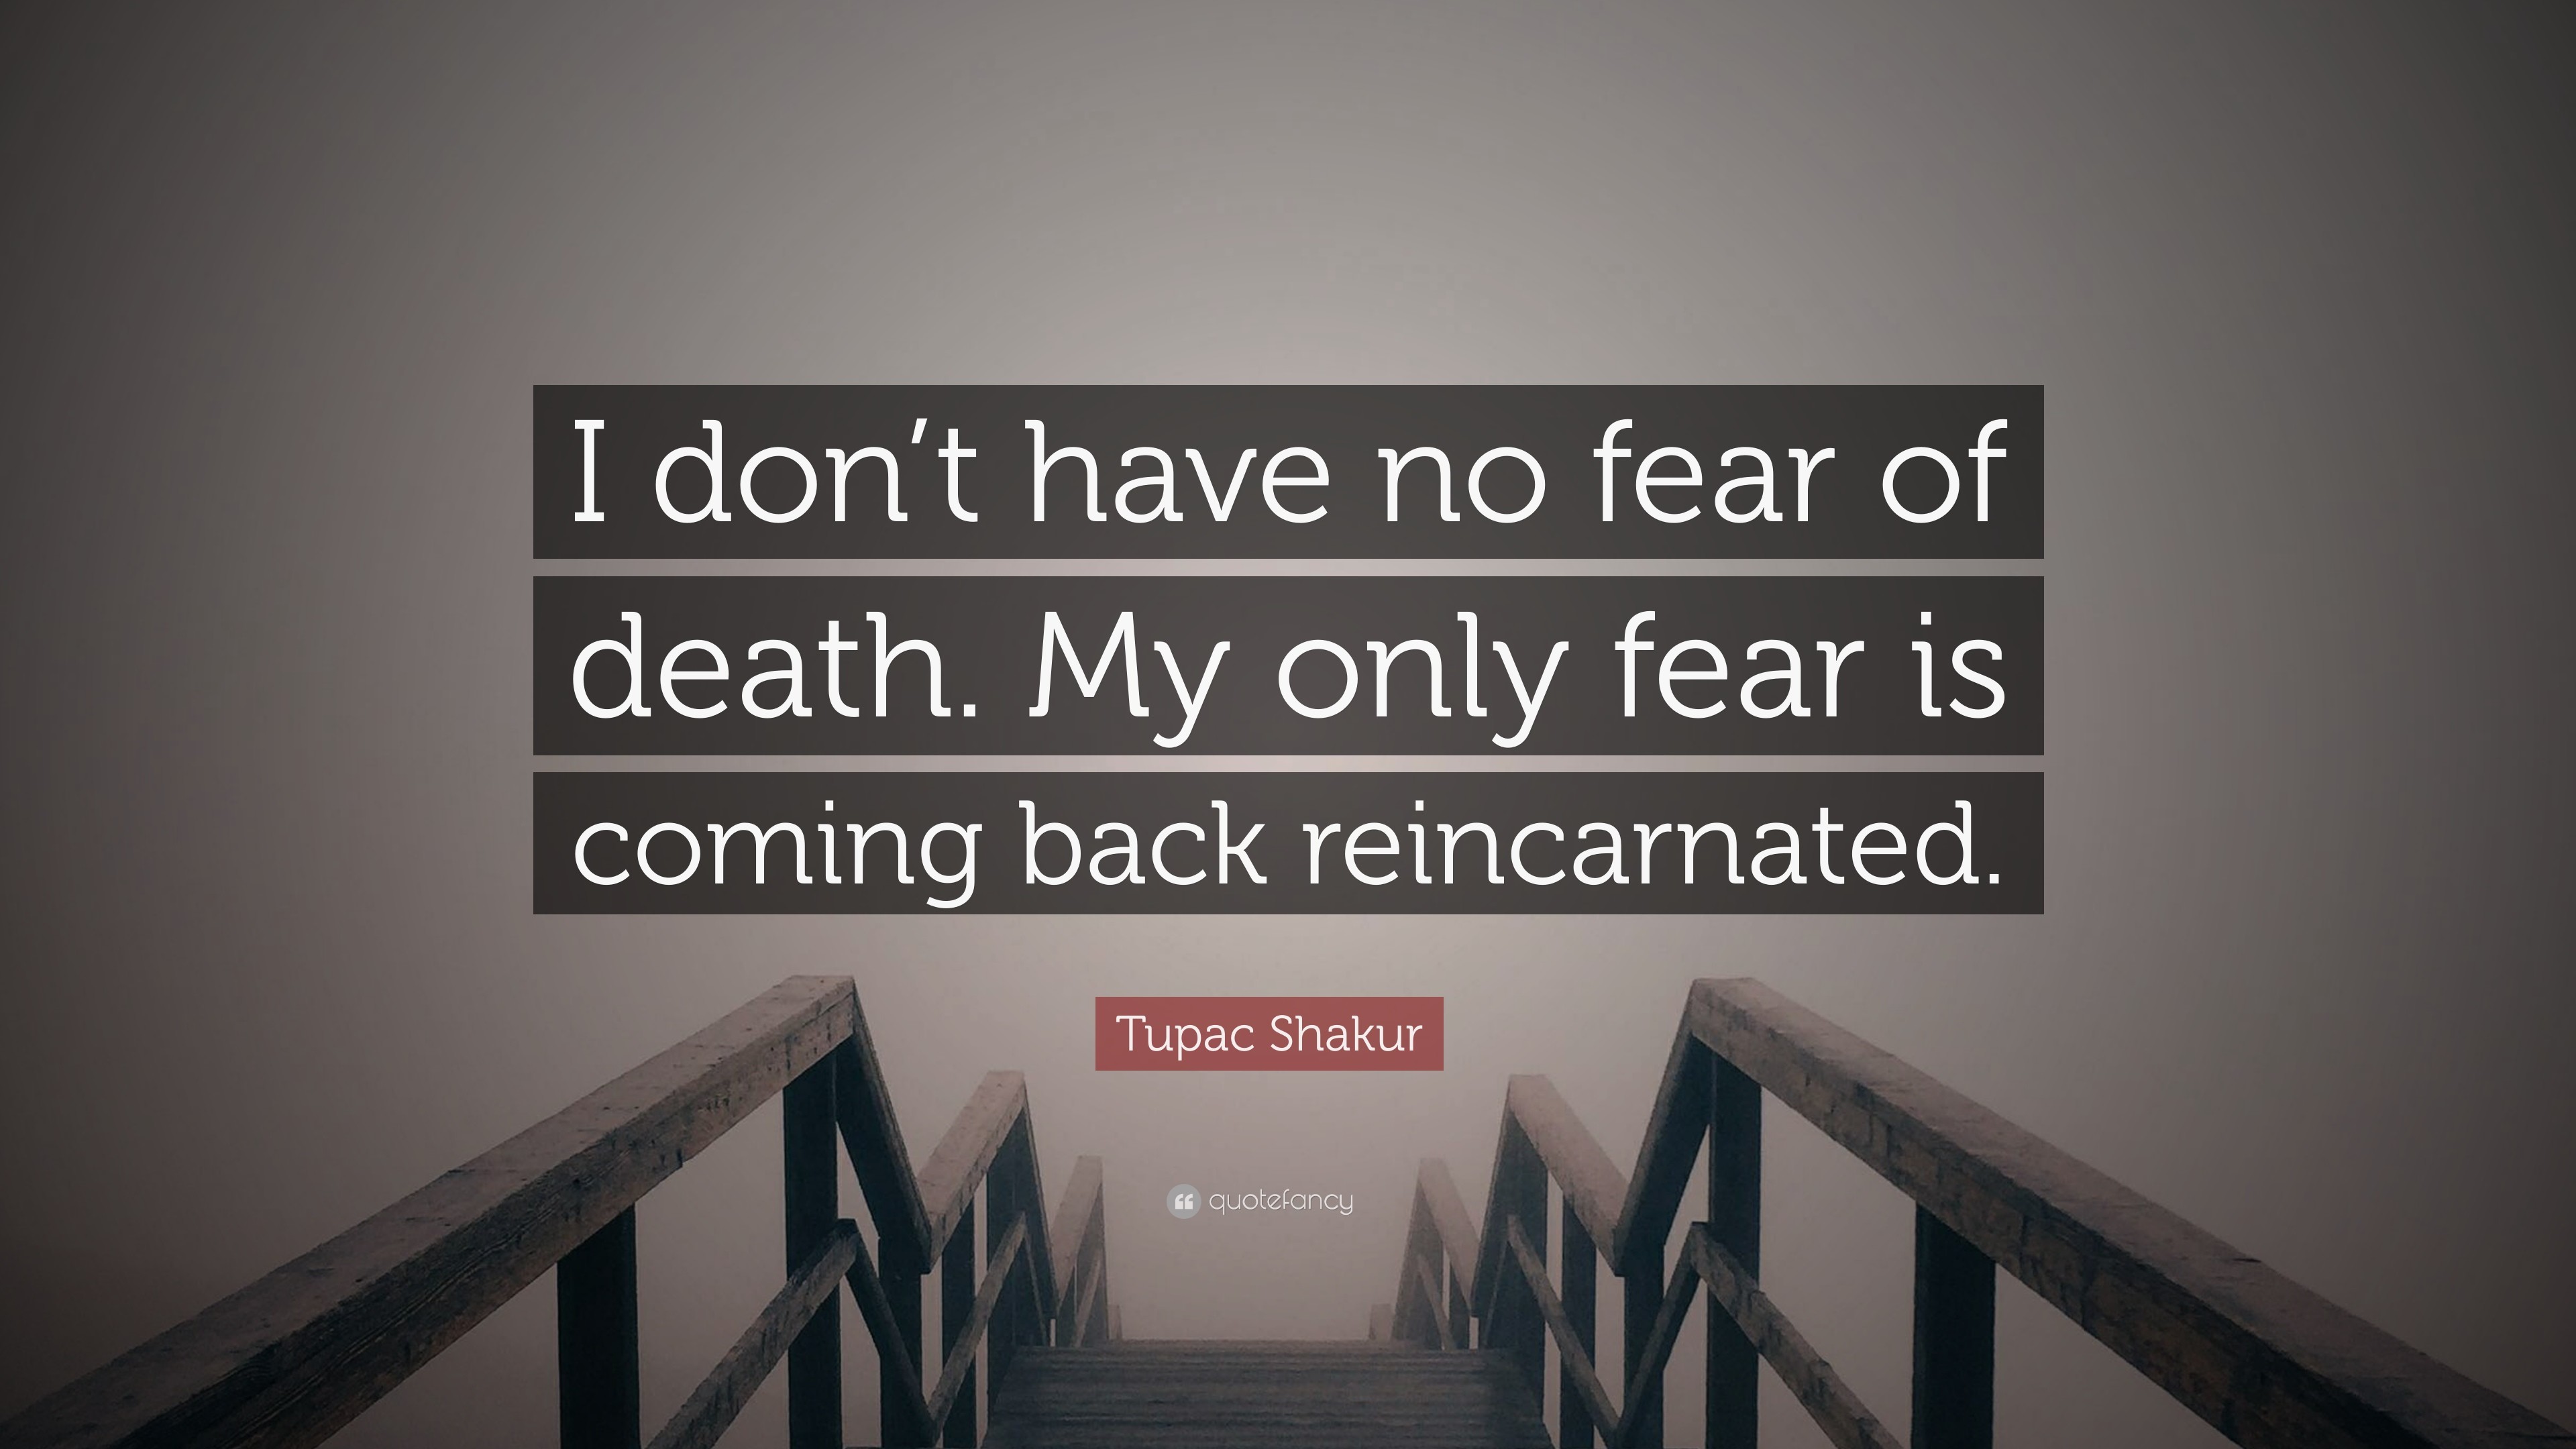 3840x2160 Tupac Shakur Quote: “I don't have no fear of death. My